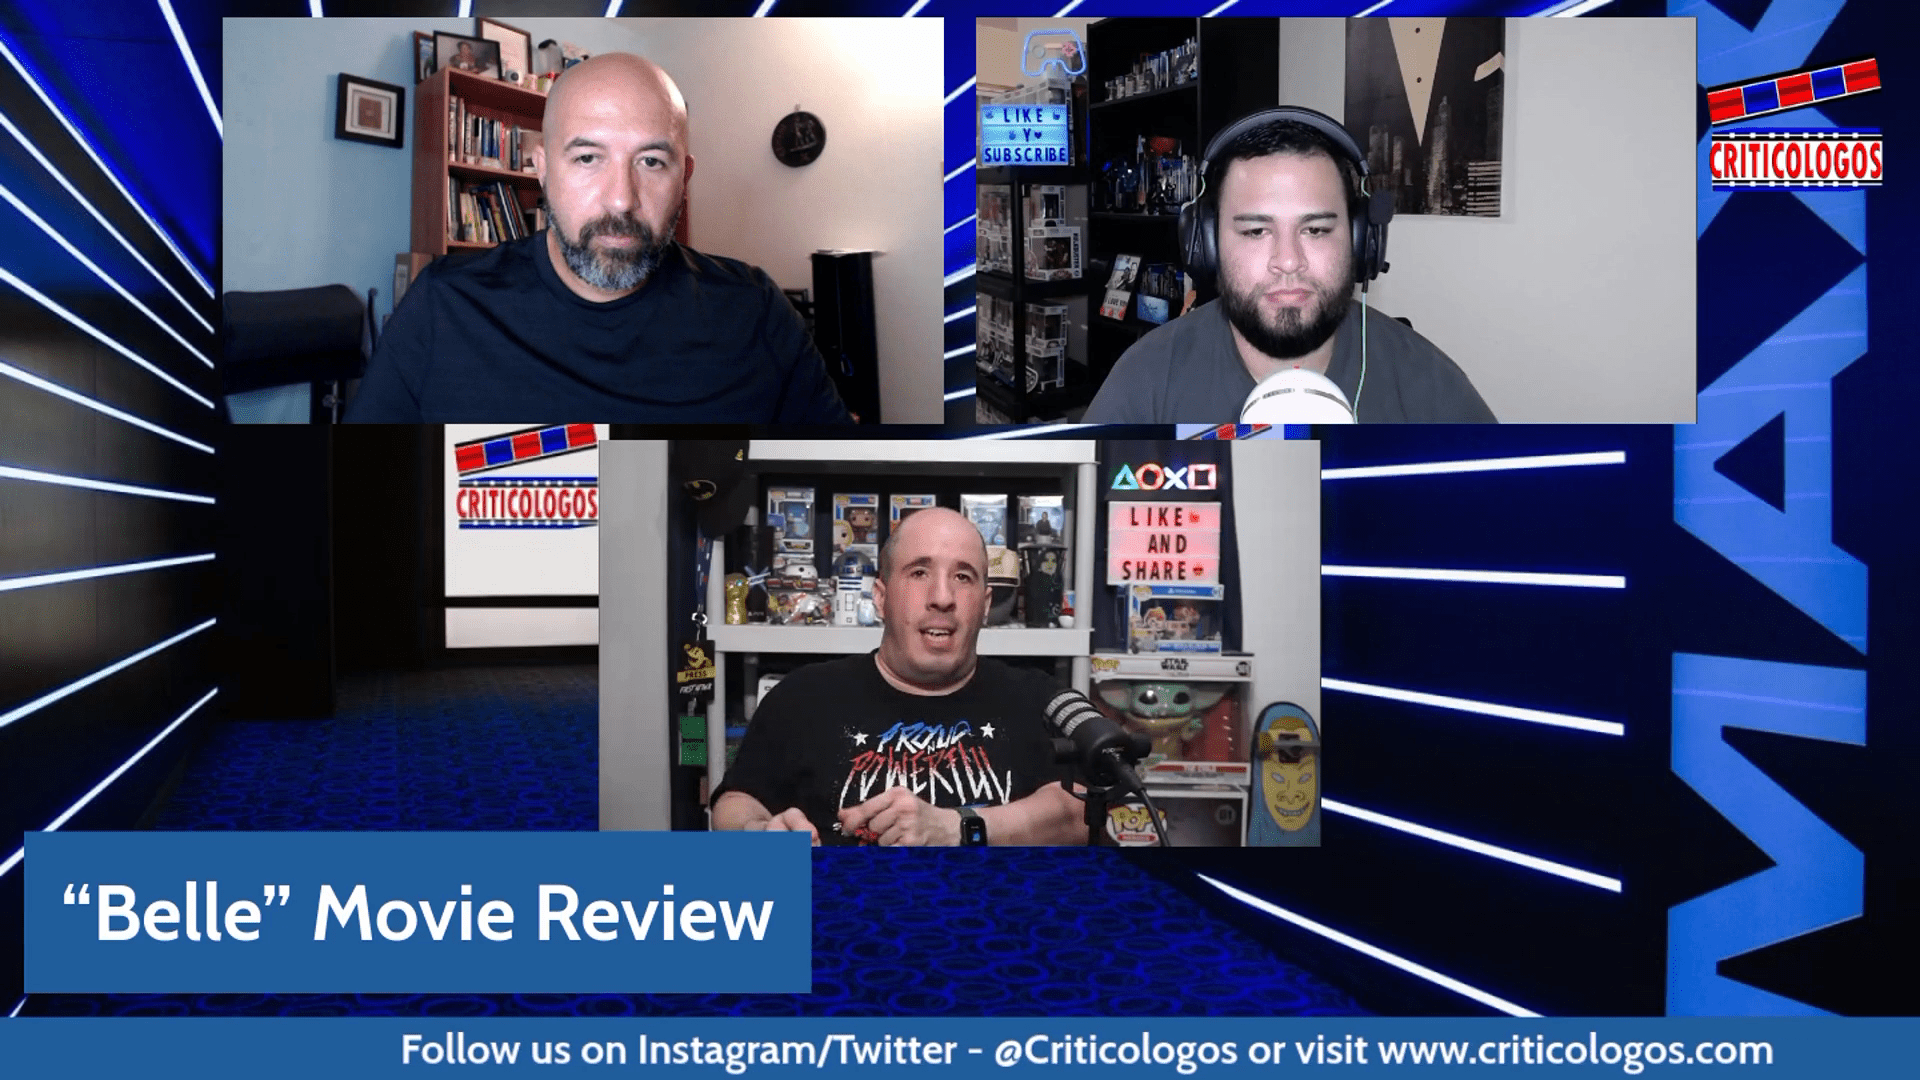 #Criticologos LIVE! Meets #IntoTheAniVerse LIVE! … #SuperCrooks (#Netflix) S1 Review, #Injustice Movie Review, & #Belle Movie Review.